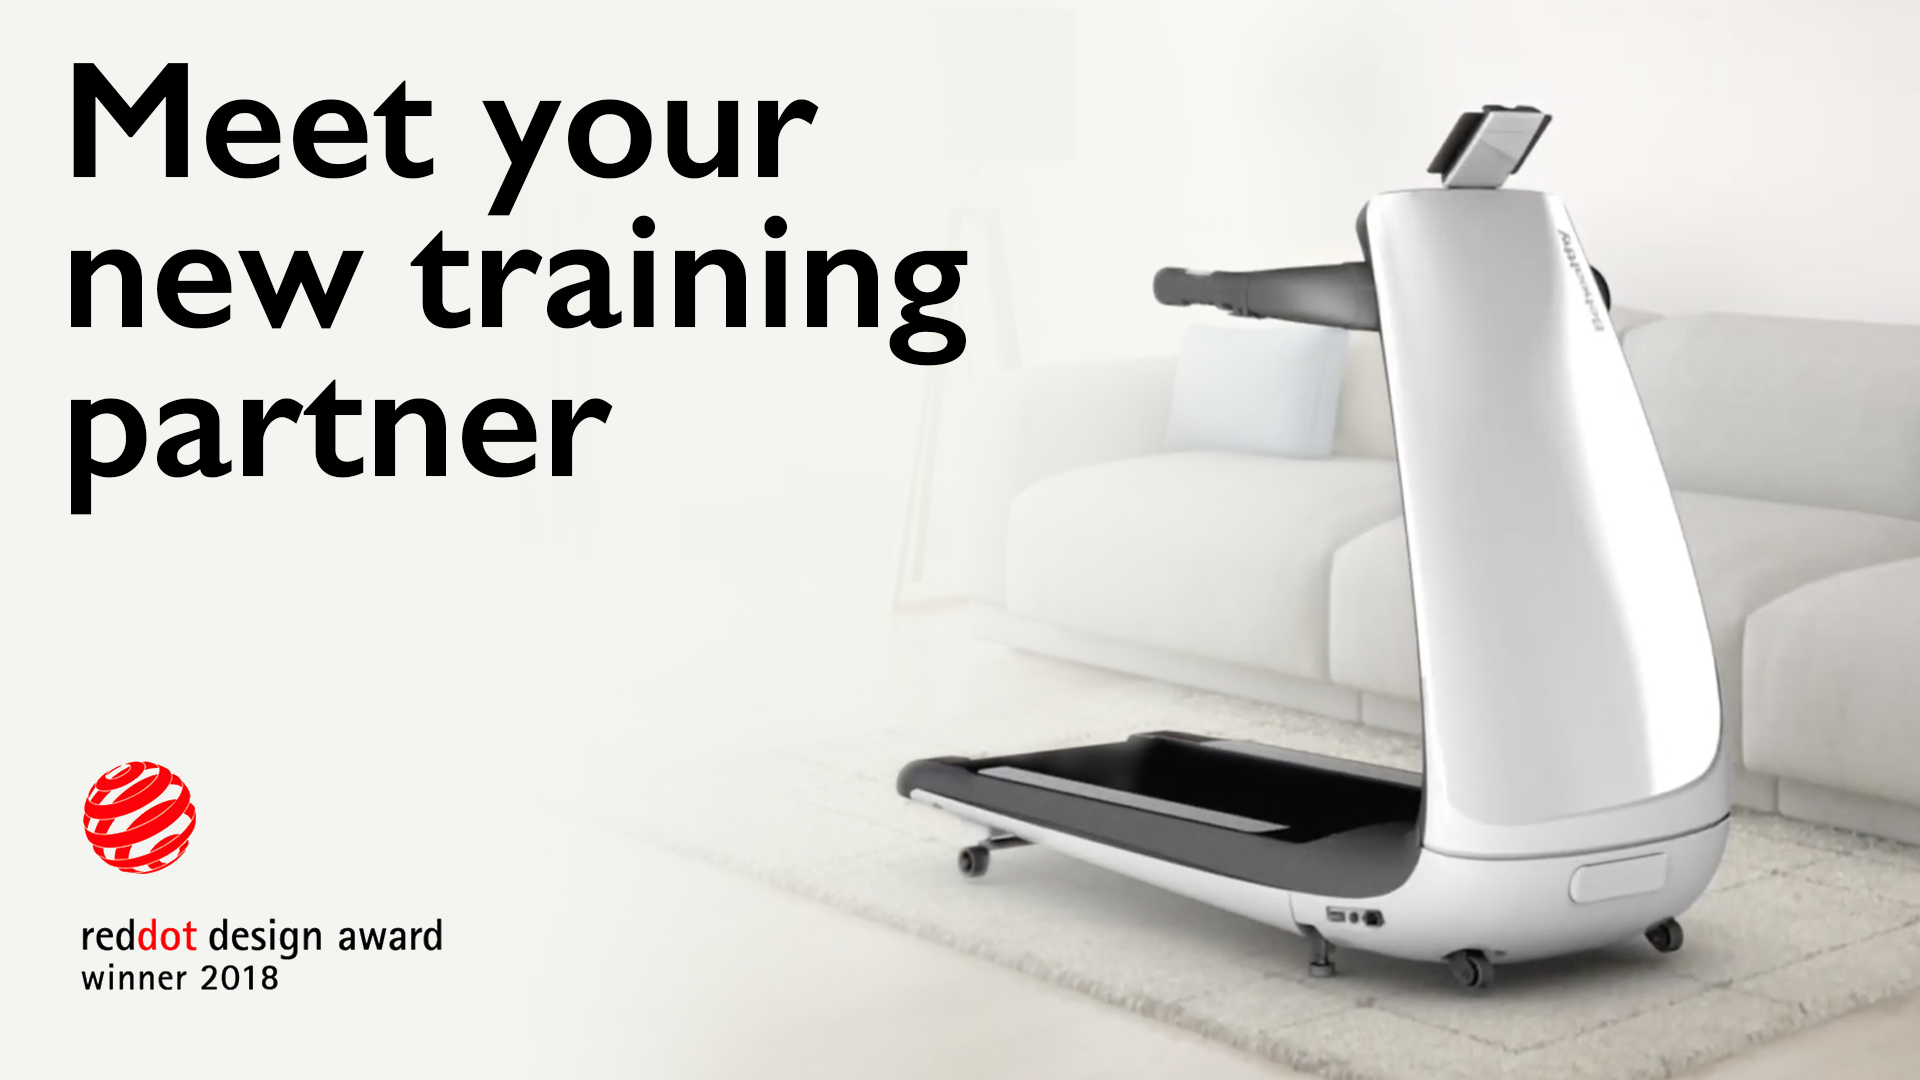 BeHealthy Treadmill with text Meet your training partner